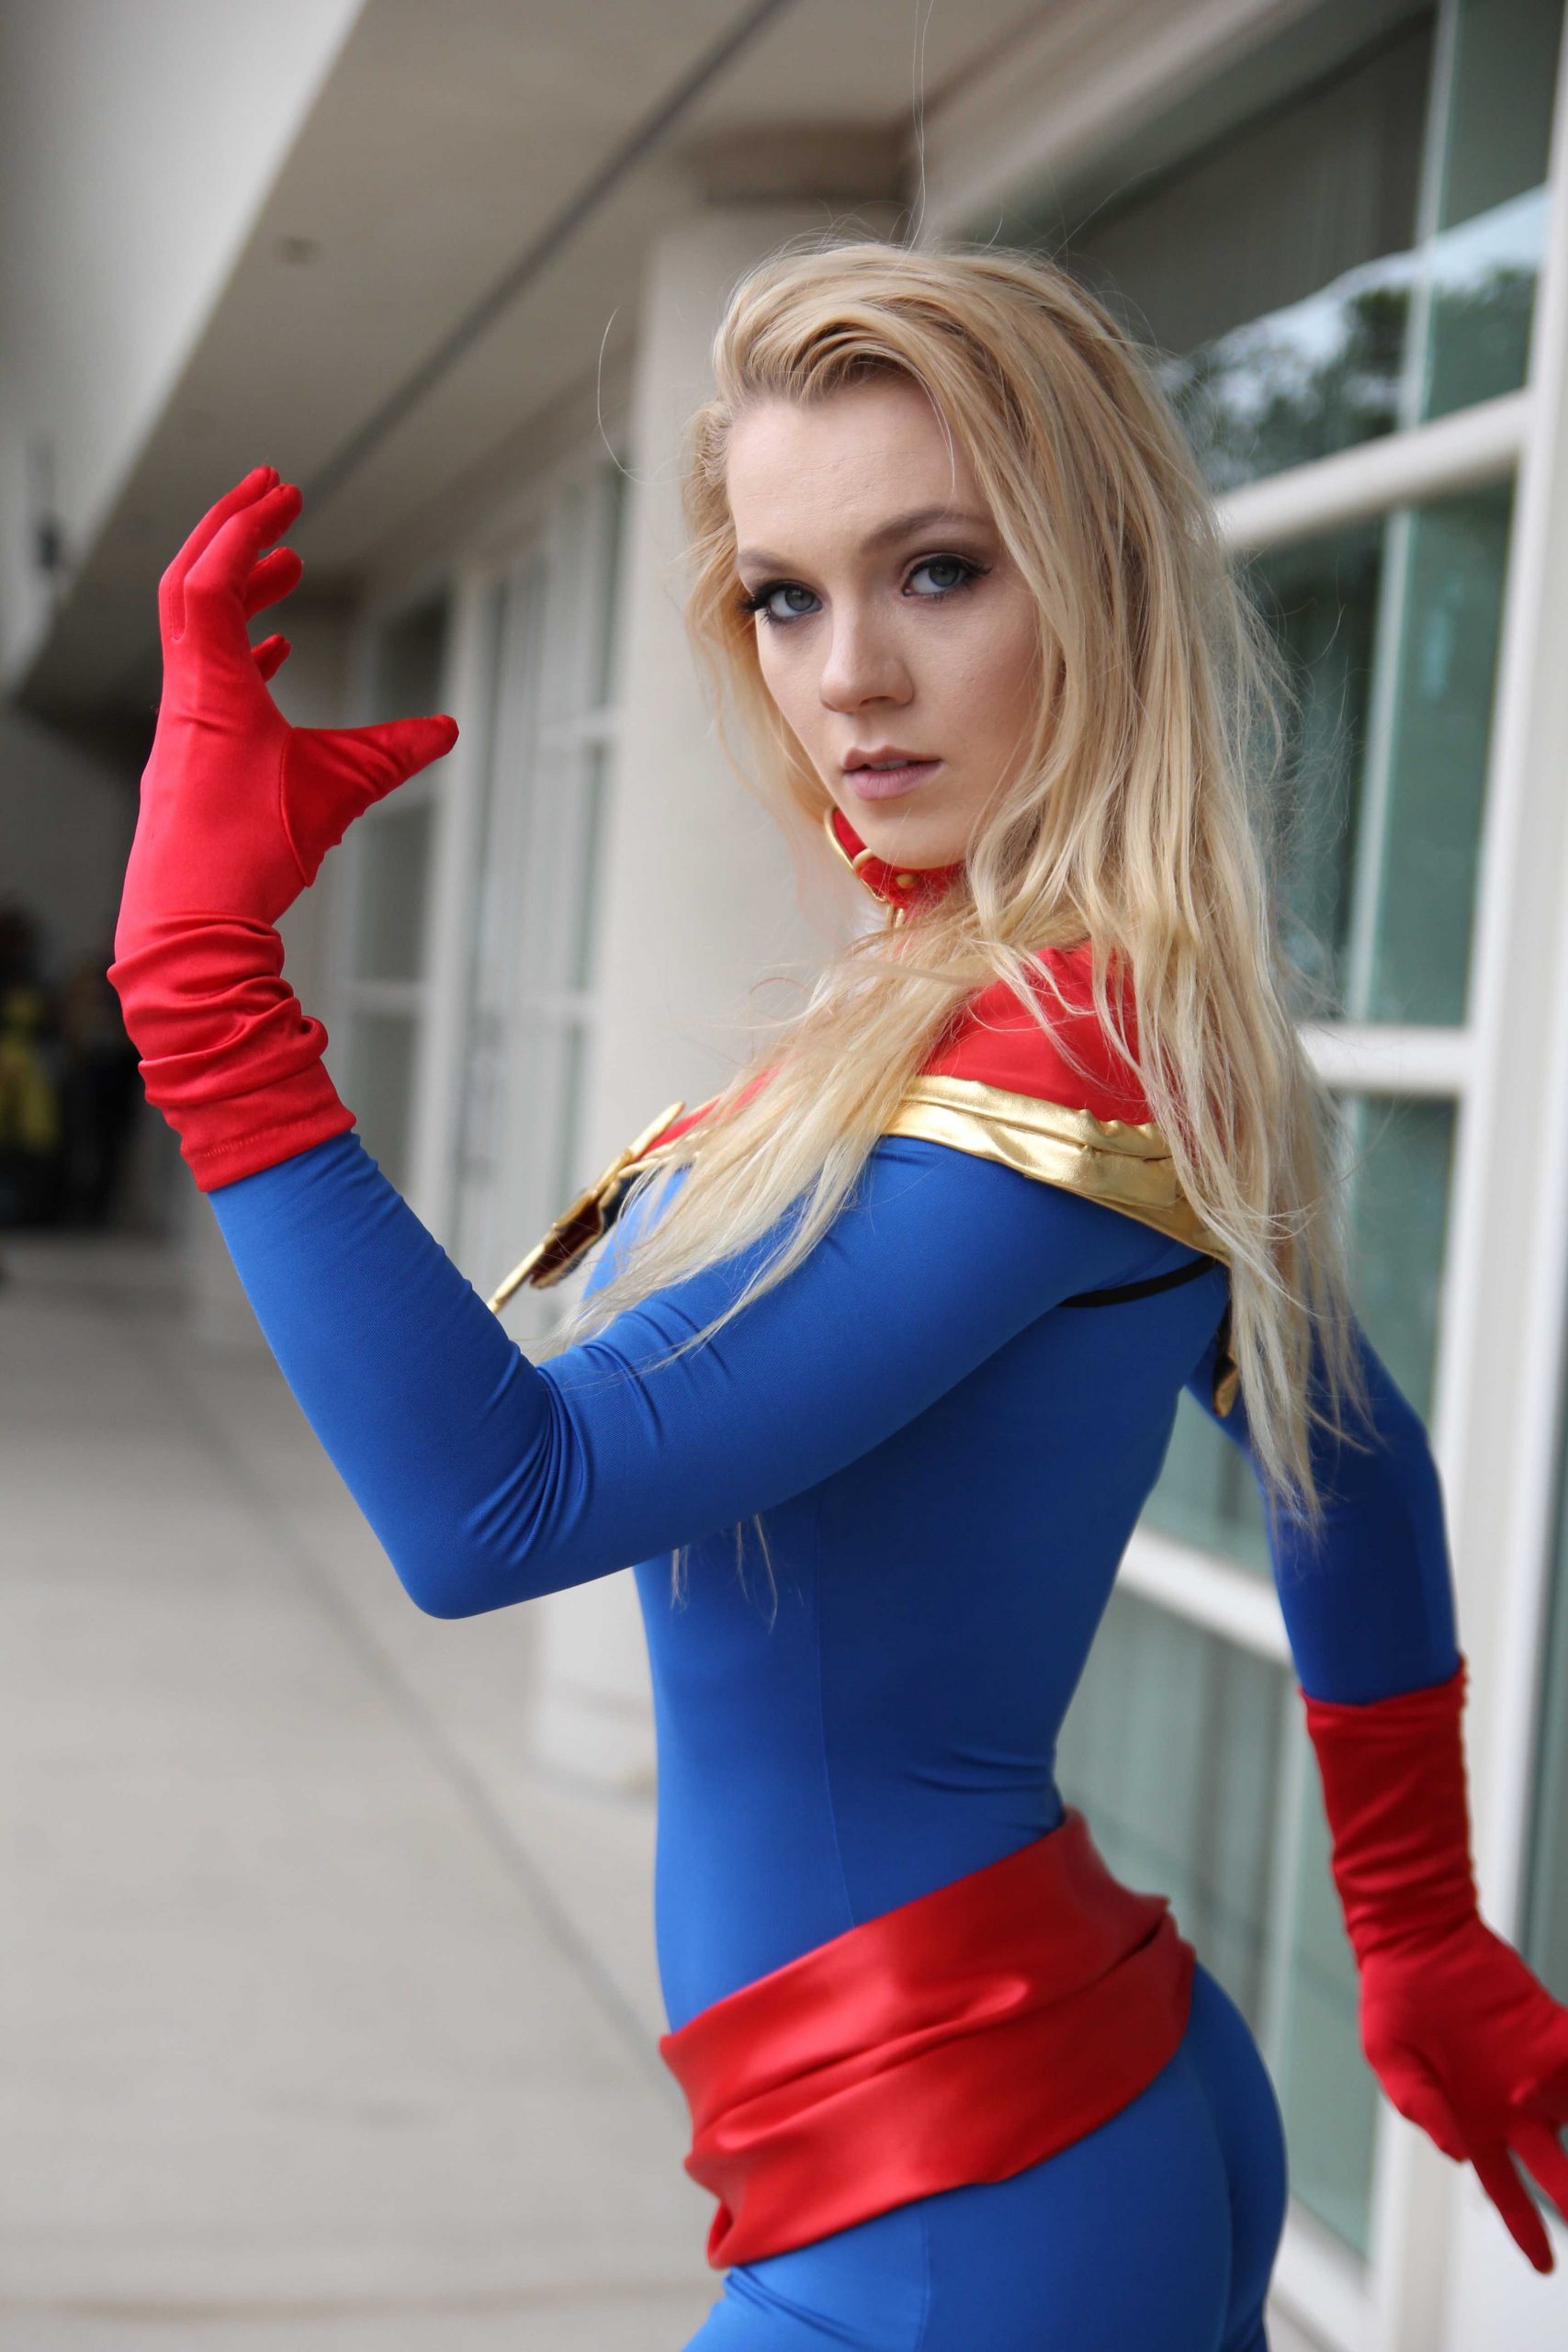 61 Hot Pictures Of Captain Marvel Will Make Your Wait For The Movie